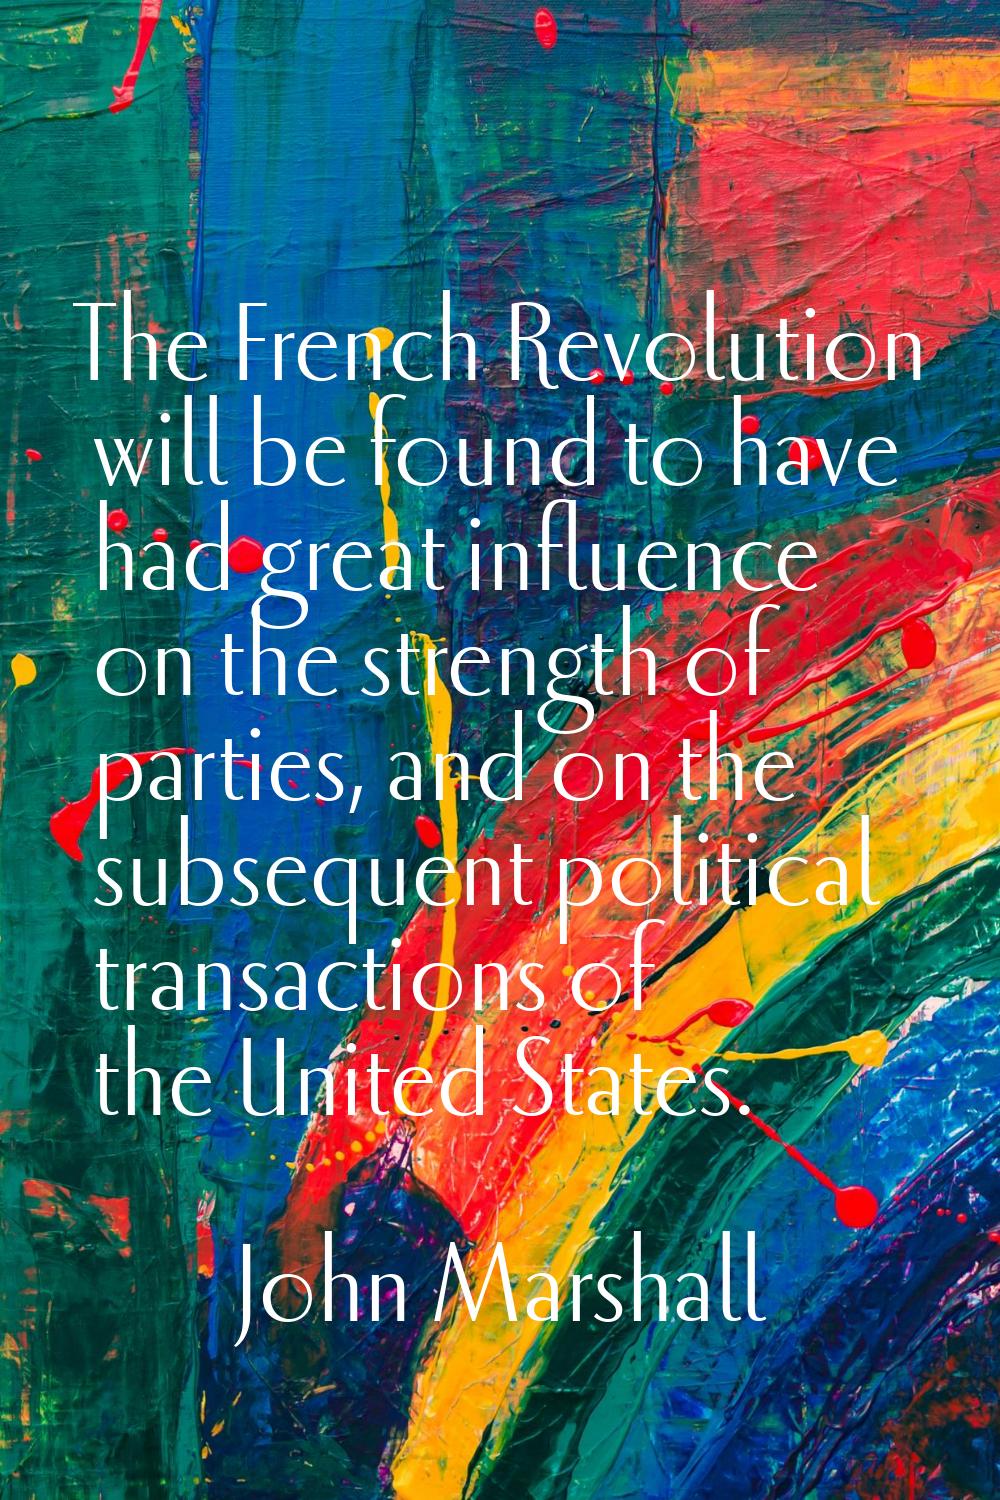 The French Revolution will be found to have had great influence on the strength of parties, and on 